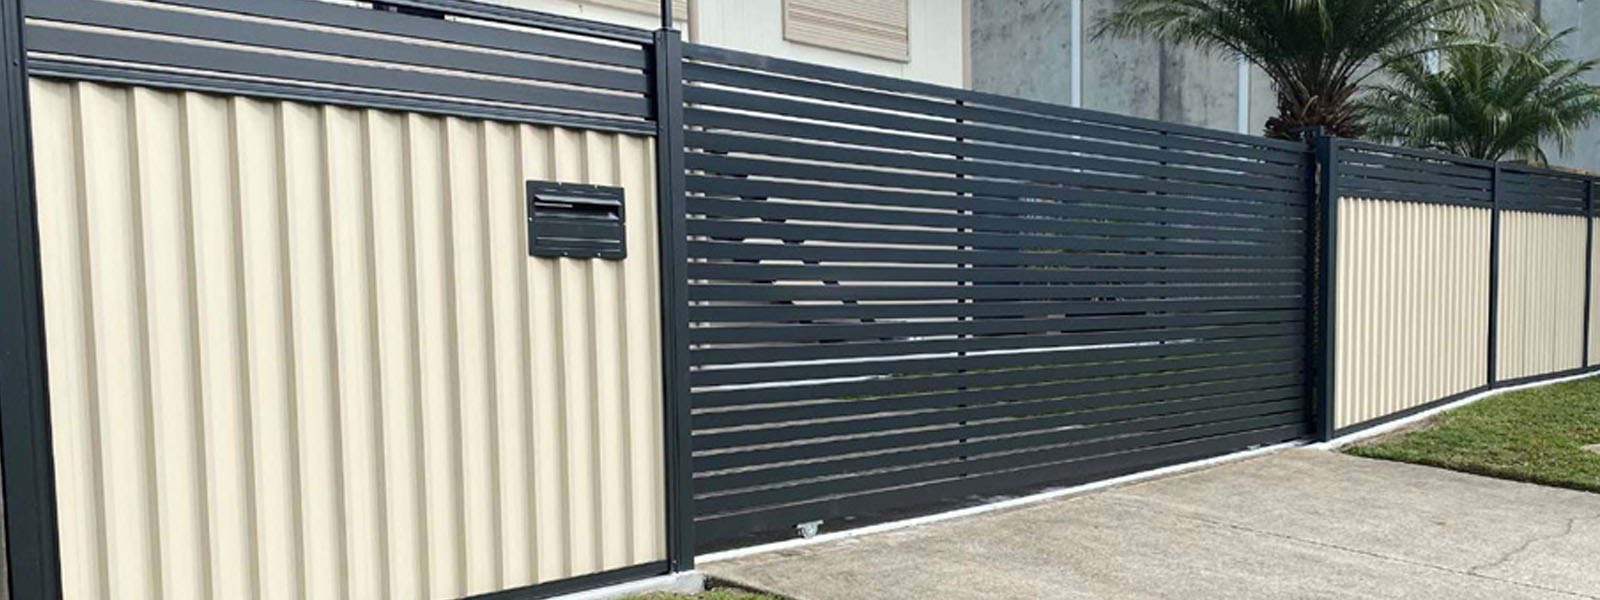 Amazing Fencing colorbond steel fence inspiration